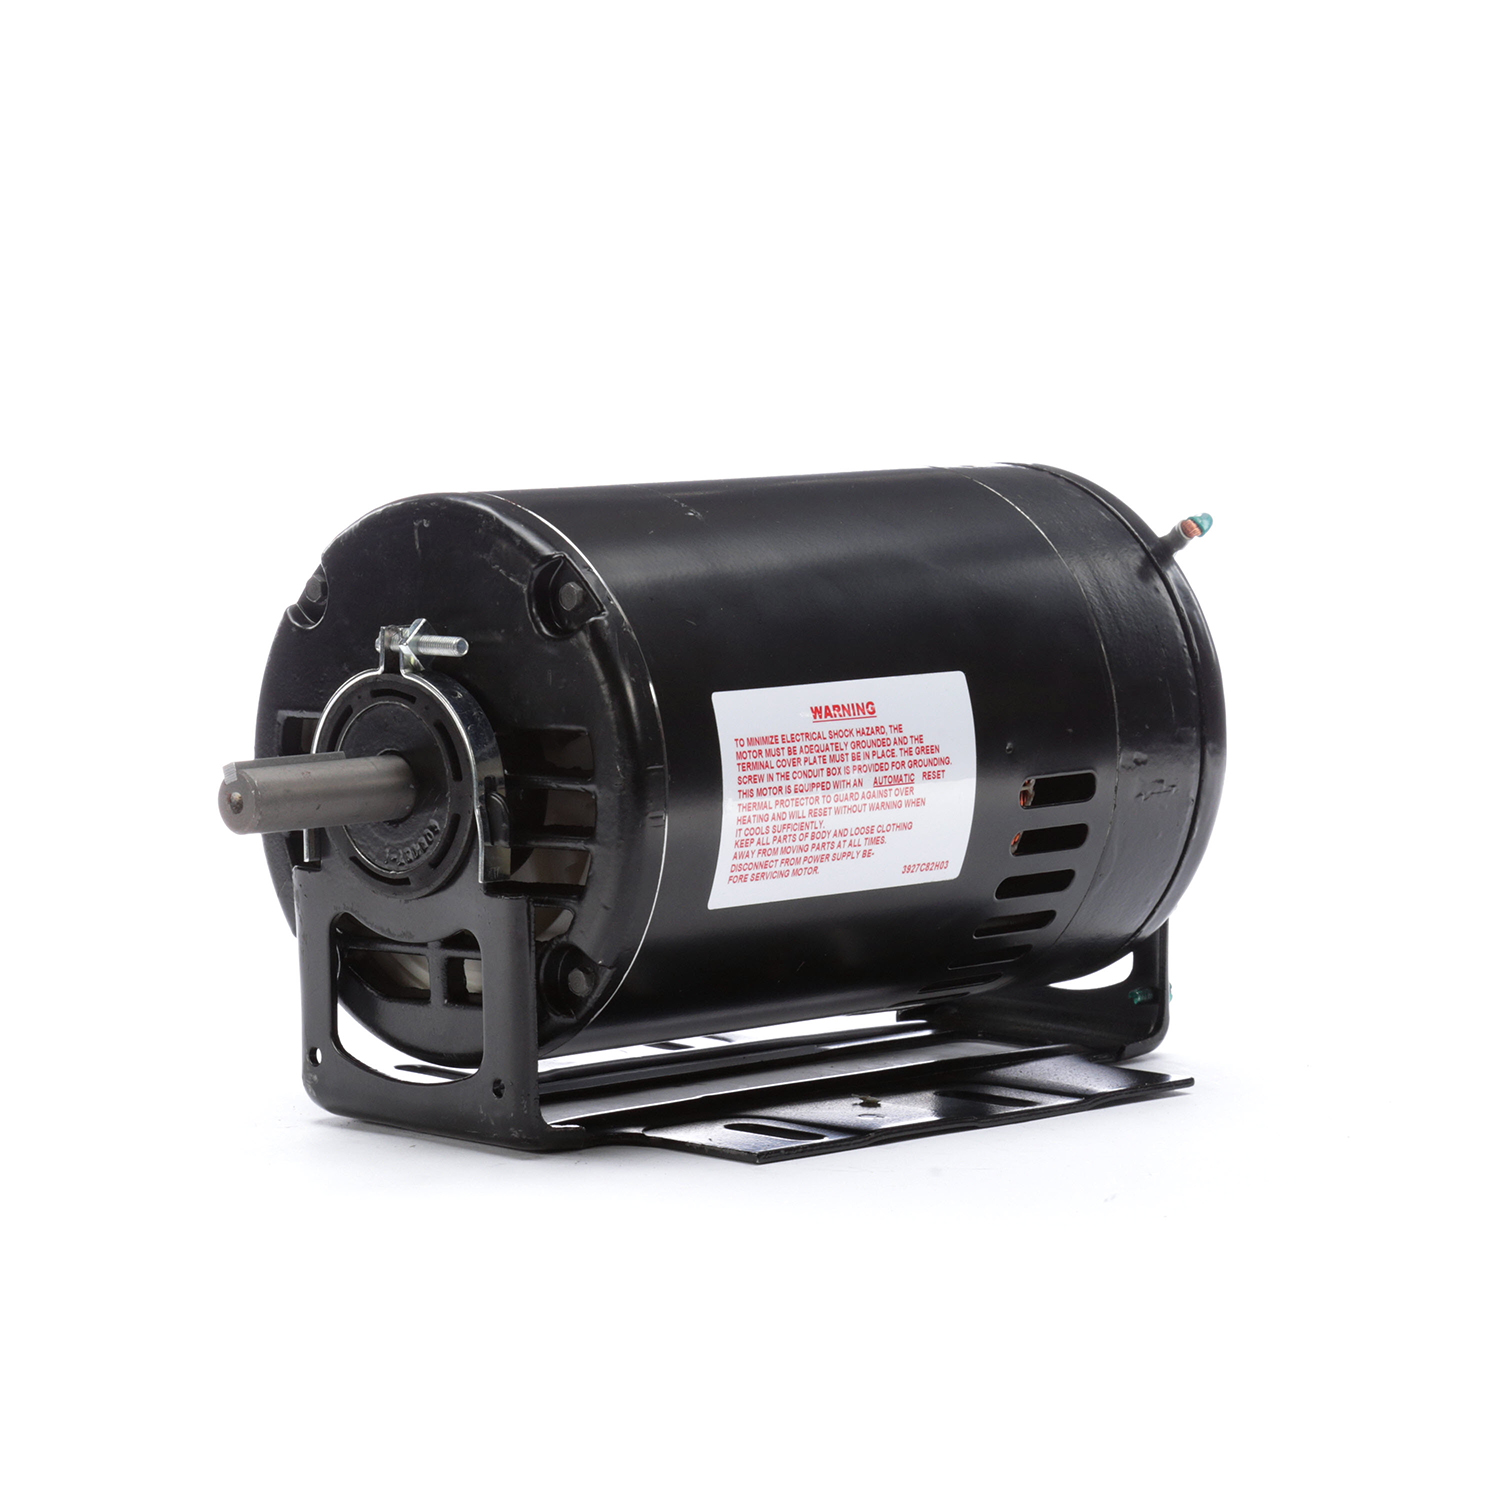 Capacitor Start Resilient Base Motor 115/208-230 Volts 1725 RPM 1/2 H.P.